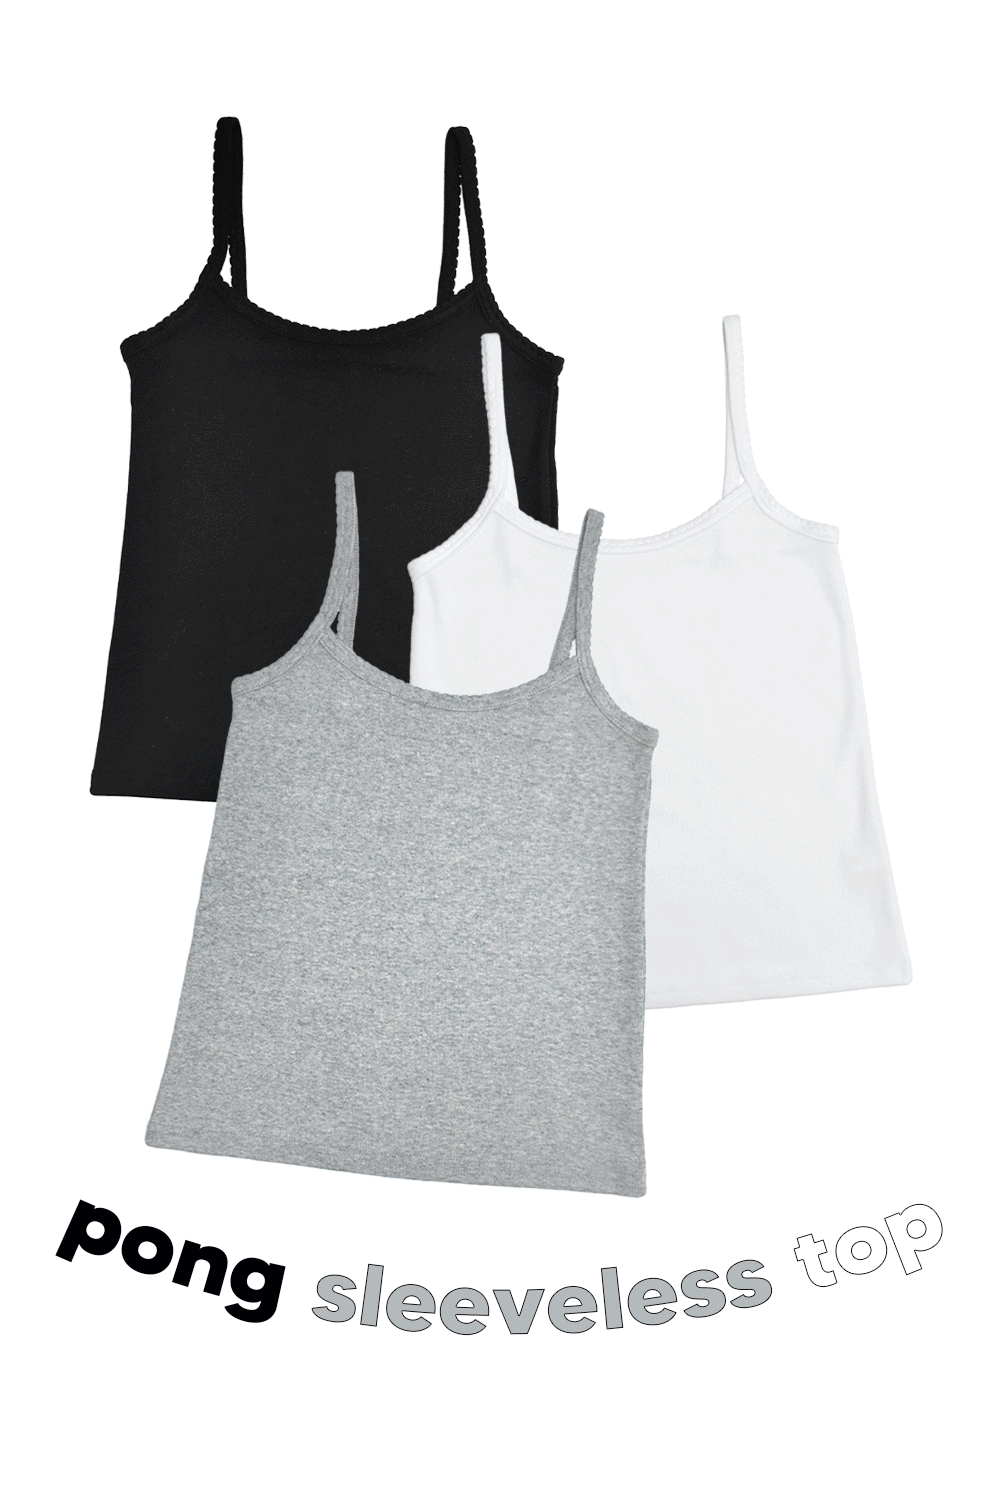 pong sleeveless top (3colors)